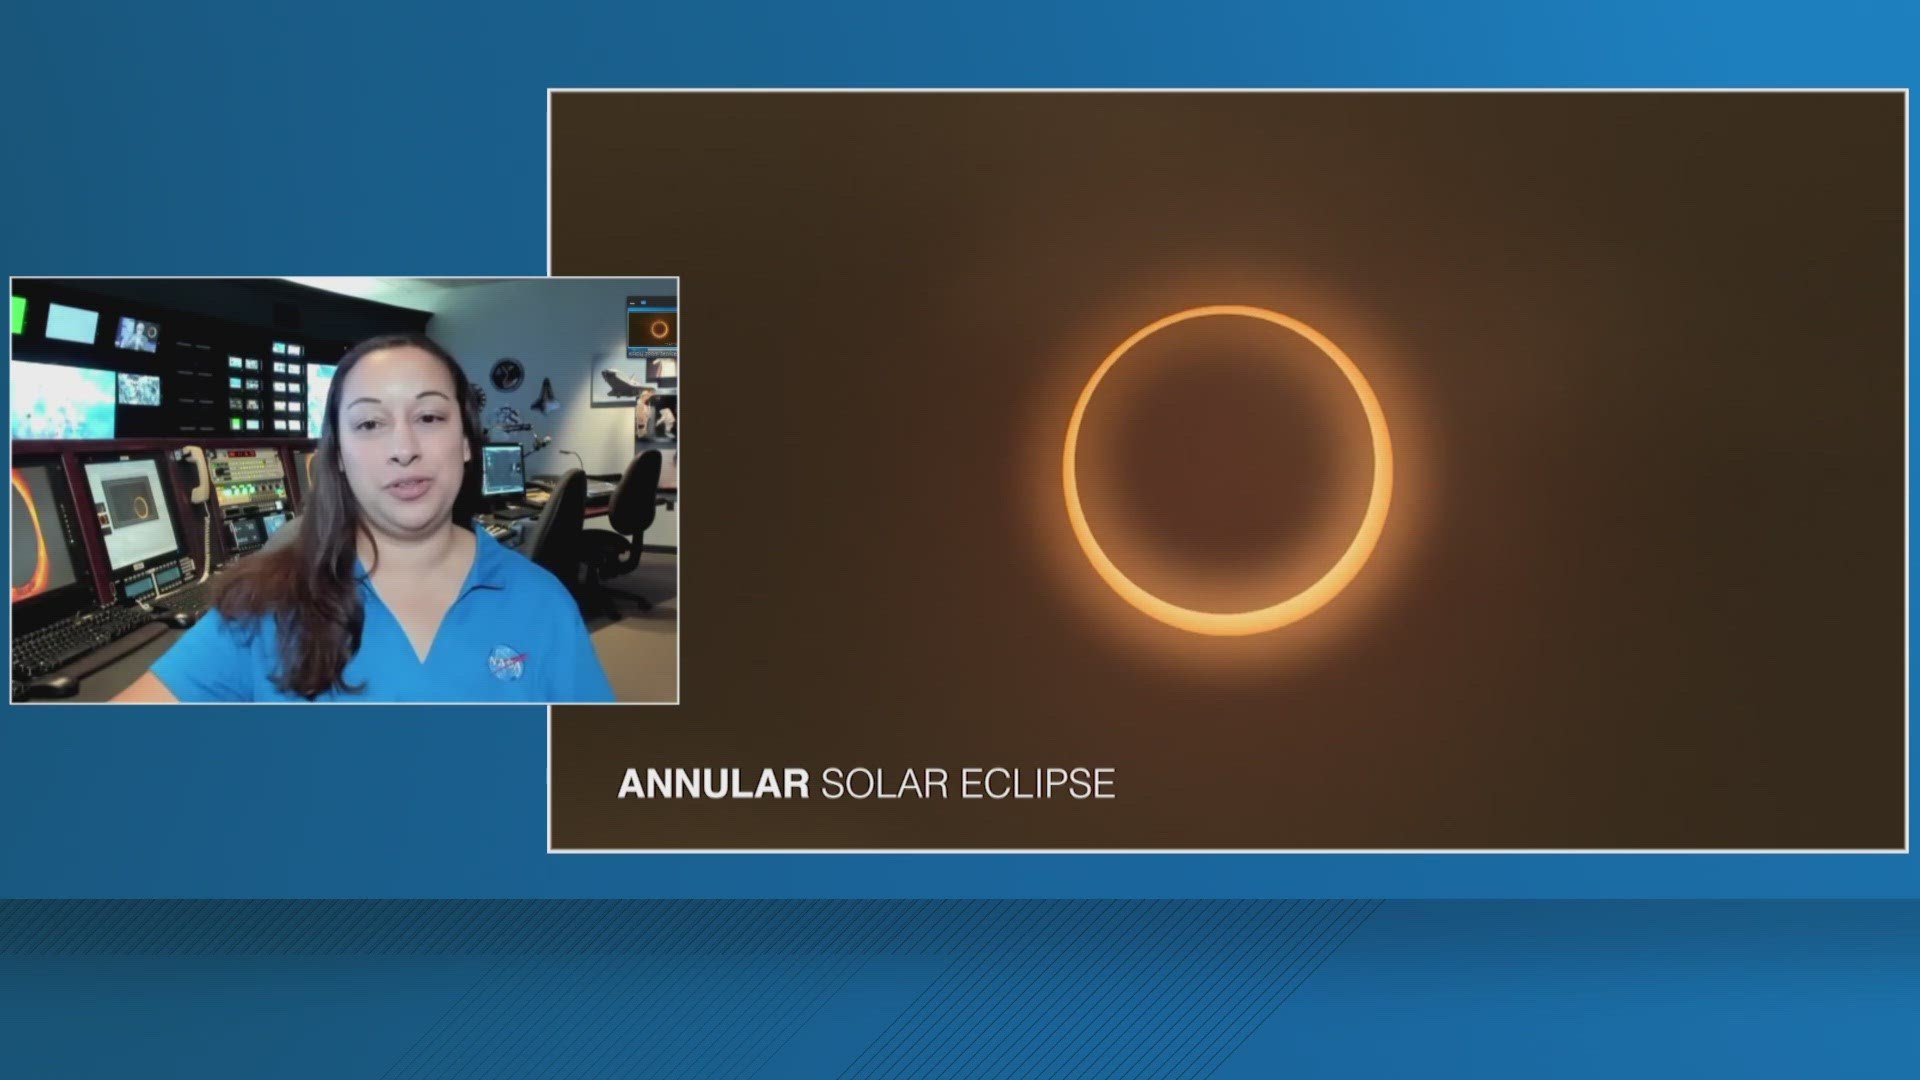 NASA Highlights Media Opportunities for Upcoming Ring of Fire Eclipse - NASA